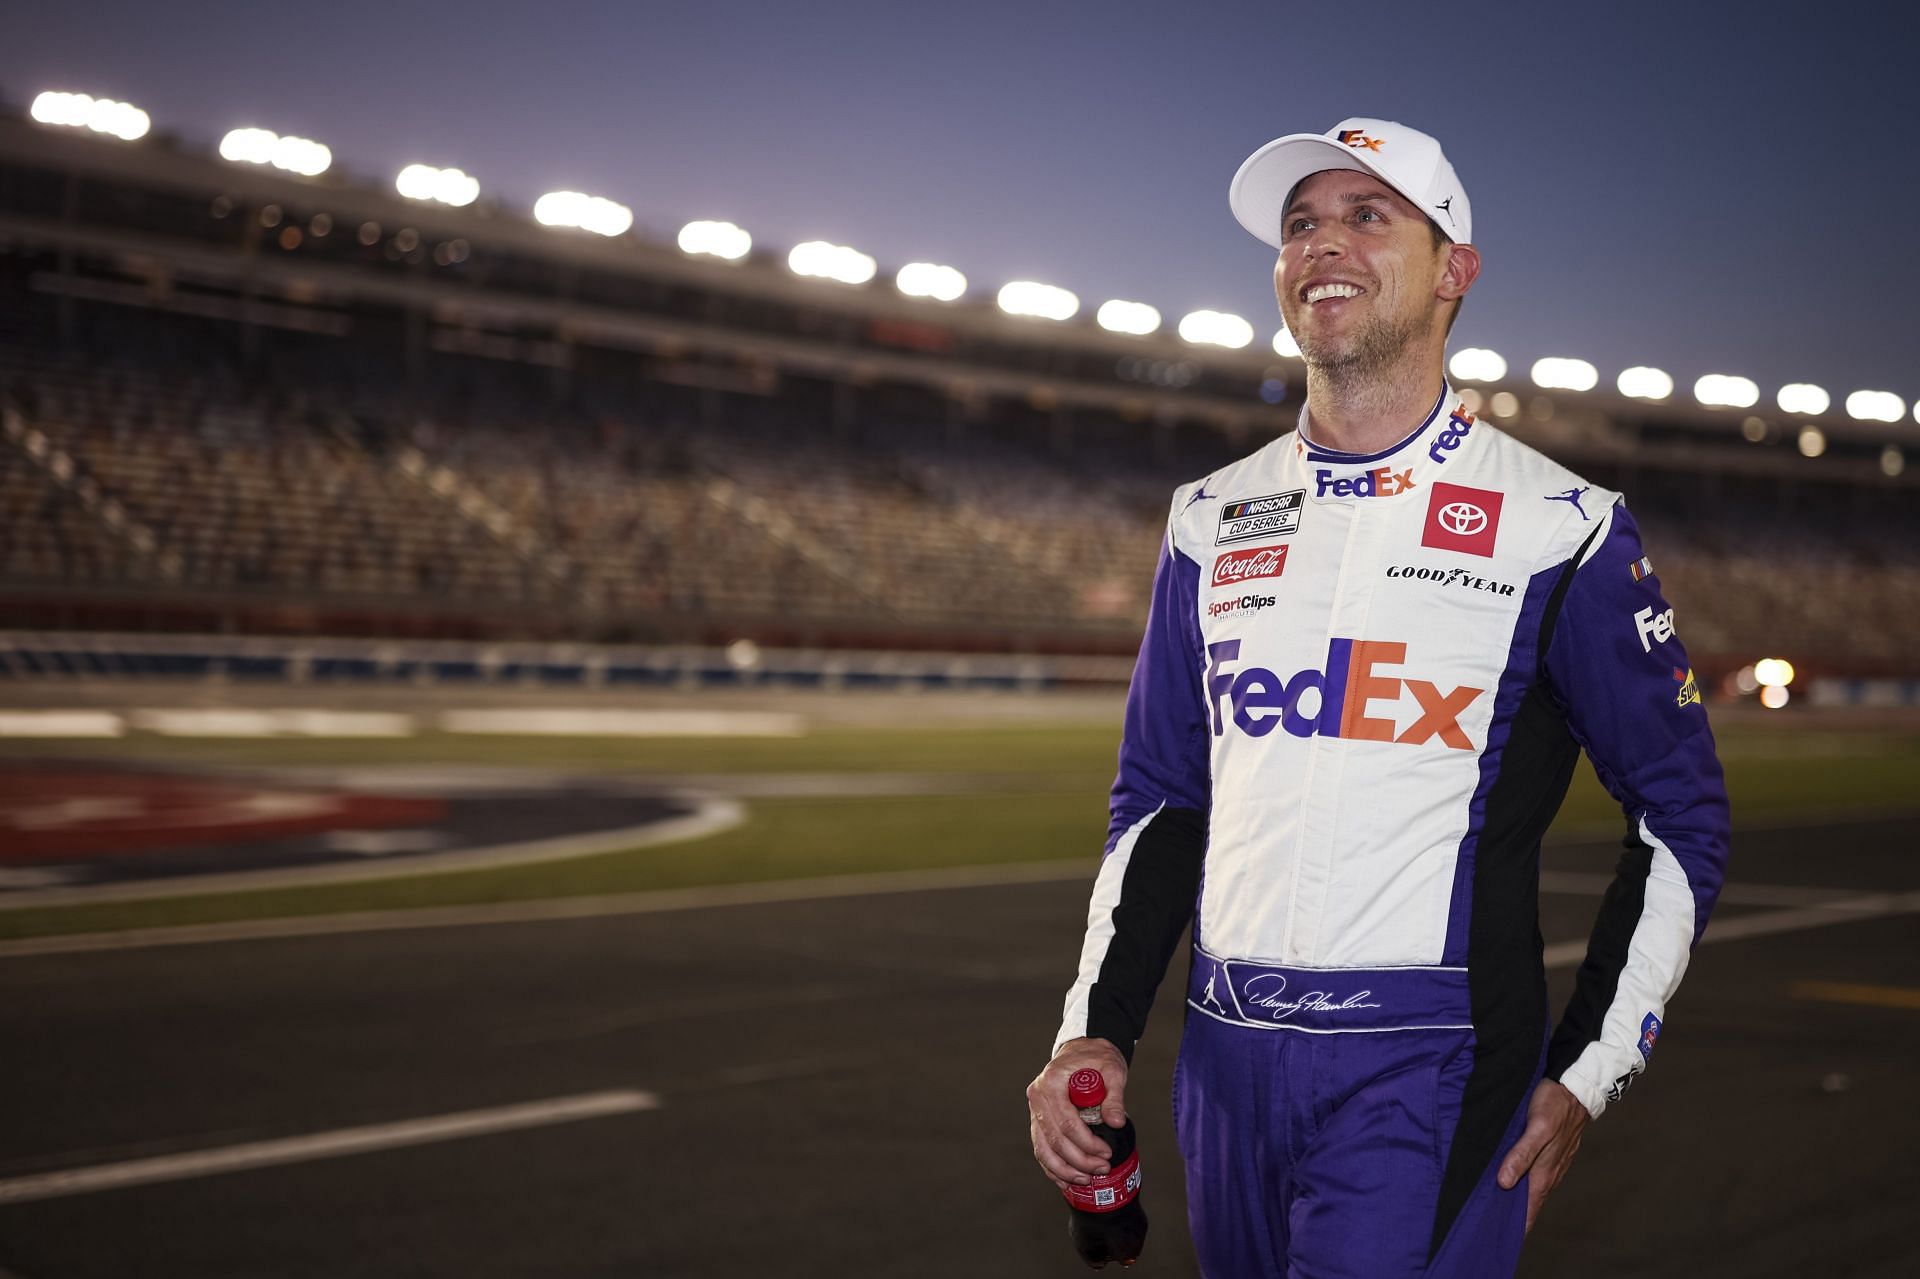 Denny Hamlin reacts after winning the pole award during qualifying for the NASCAR Cup Series Coca-Cola 600 at Charlotte Motor Speedway